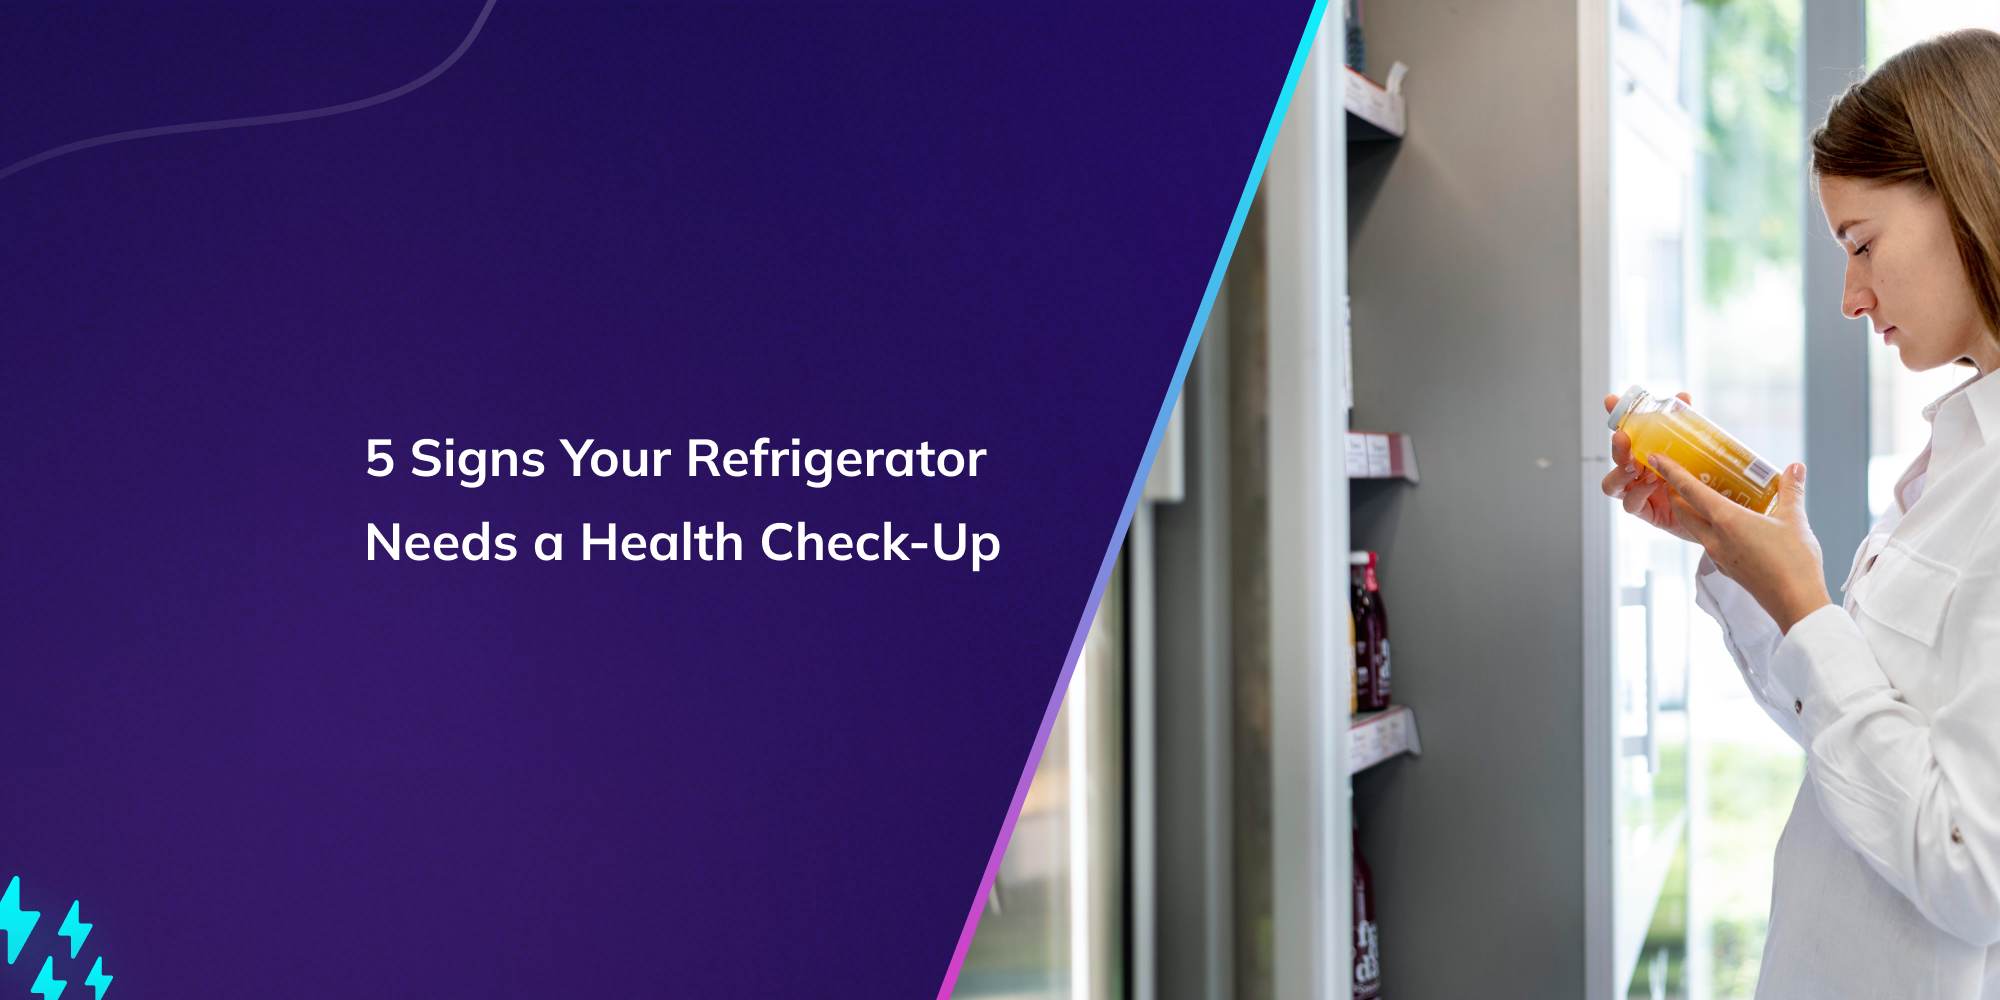 5 Signs Your Refrigerator Needs a Health Check-Up